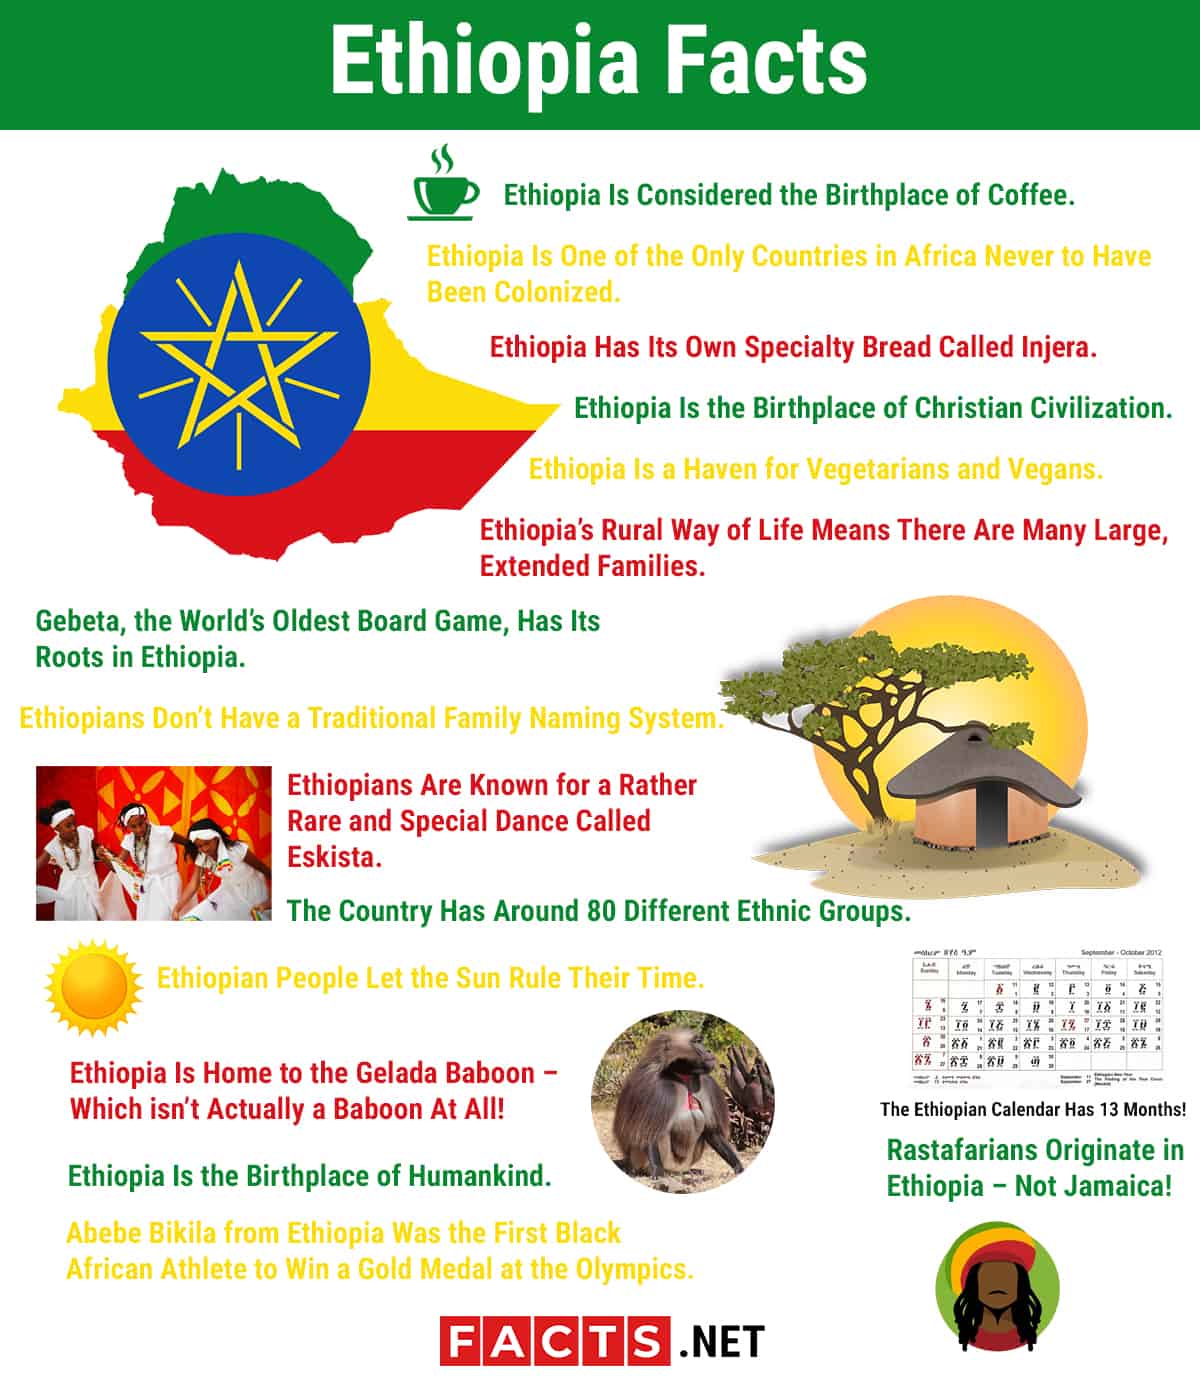 16 Ethiopia Facts Culture, History, Religion, Food & More